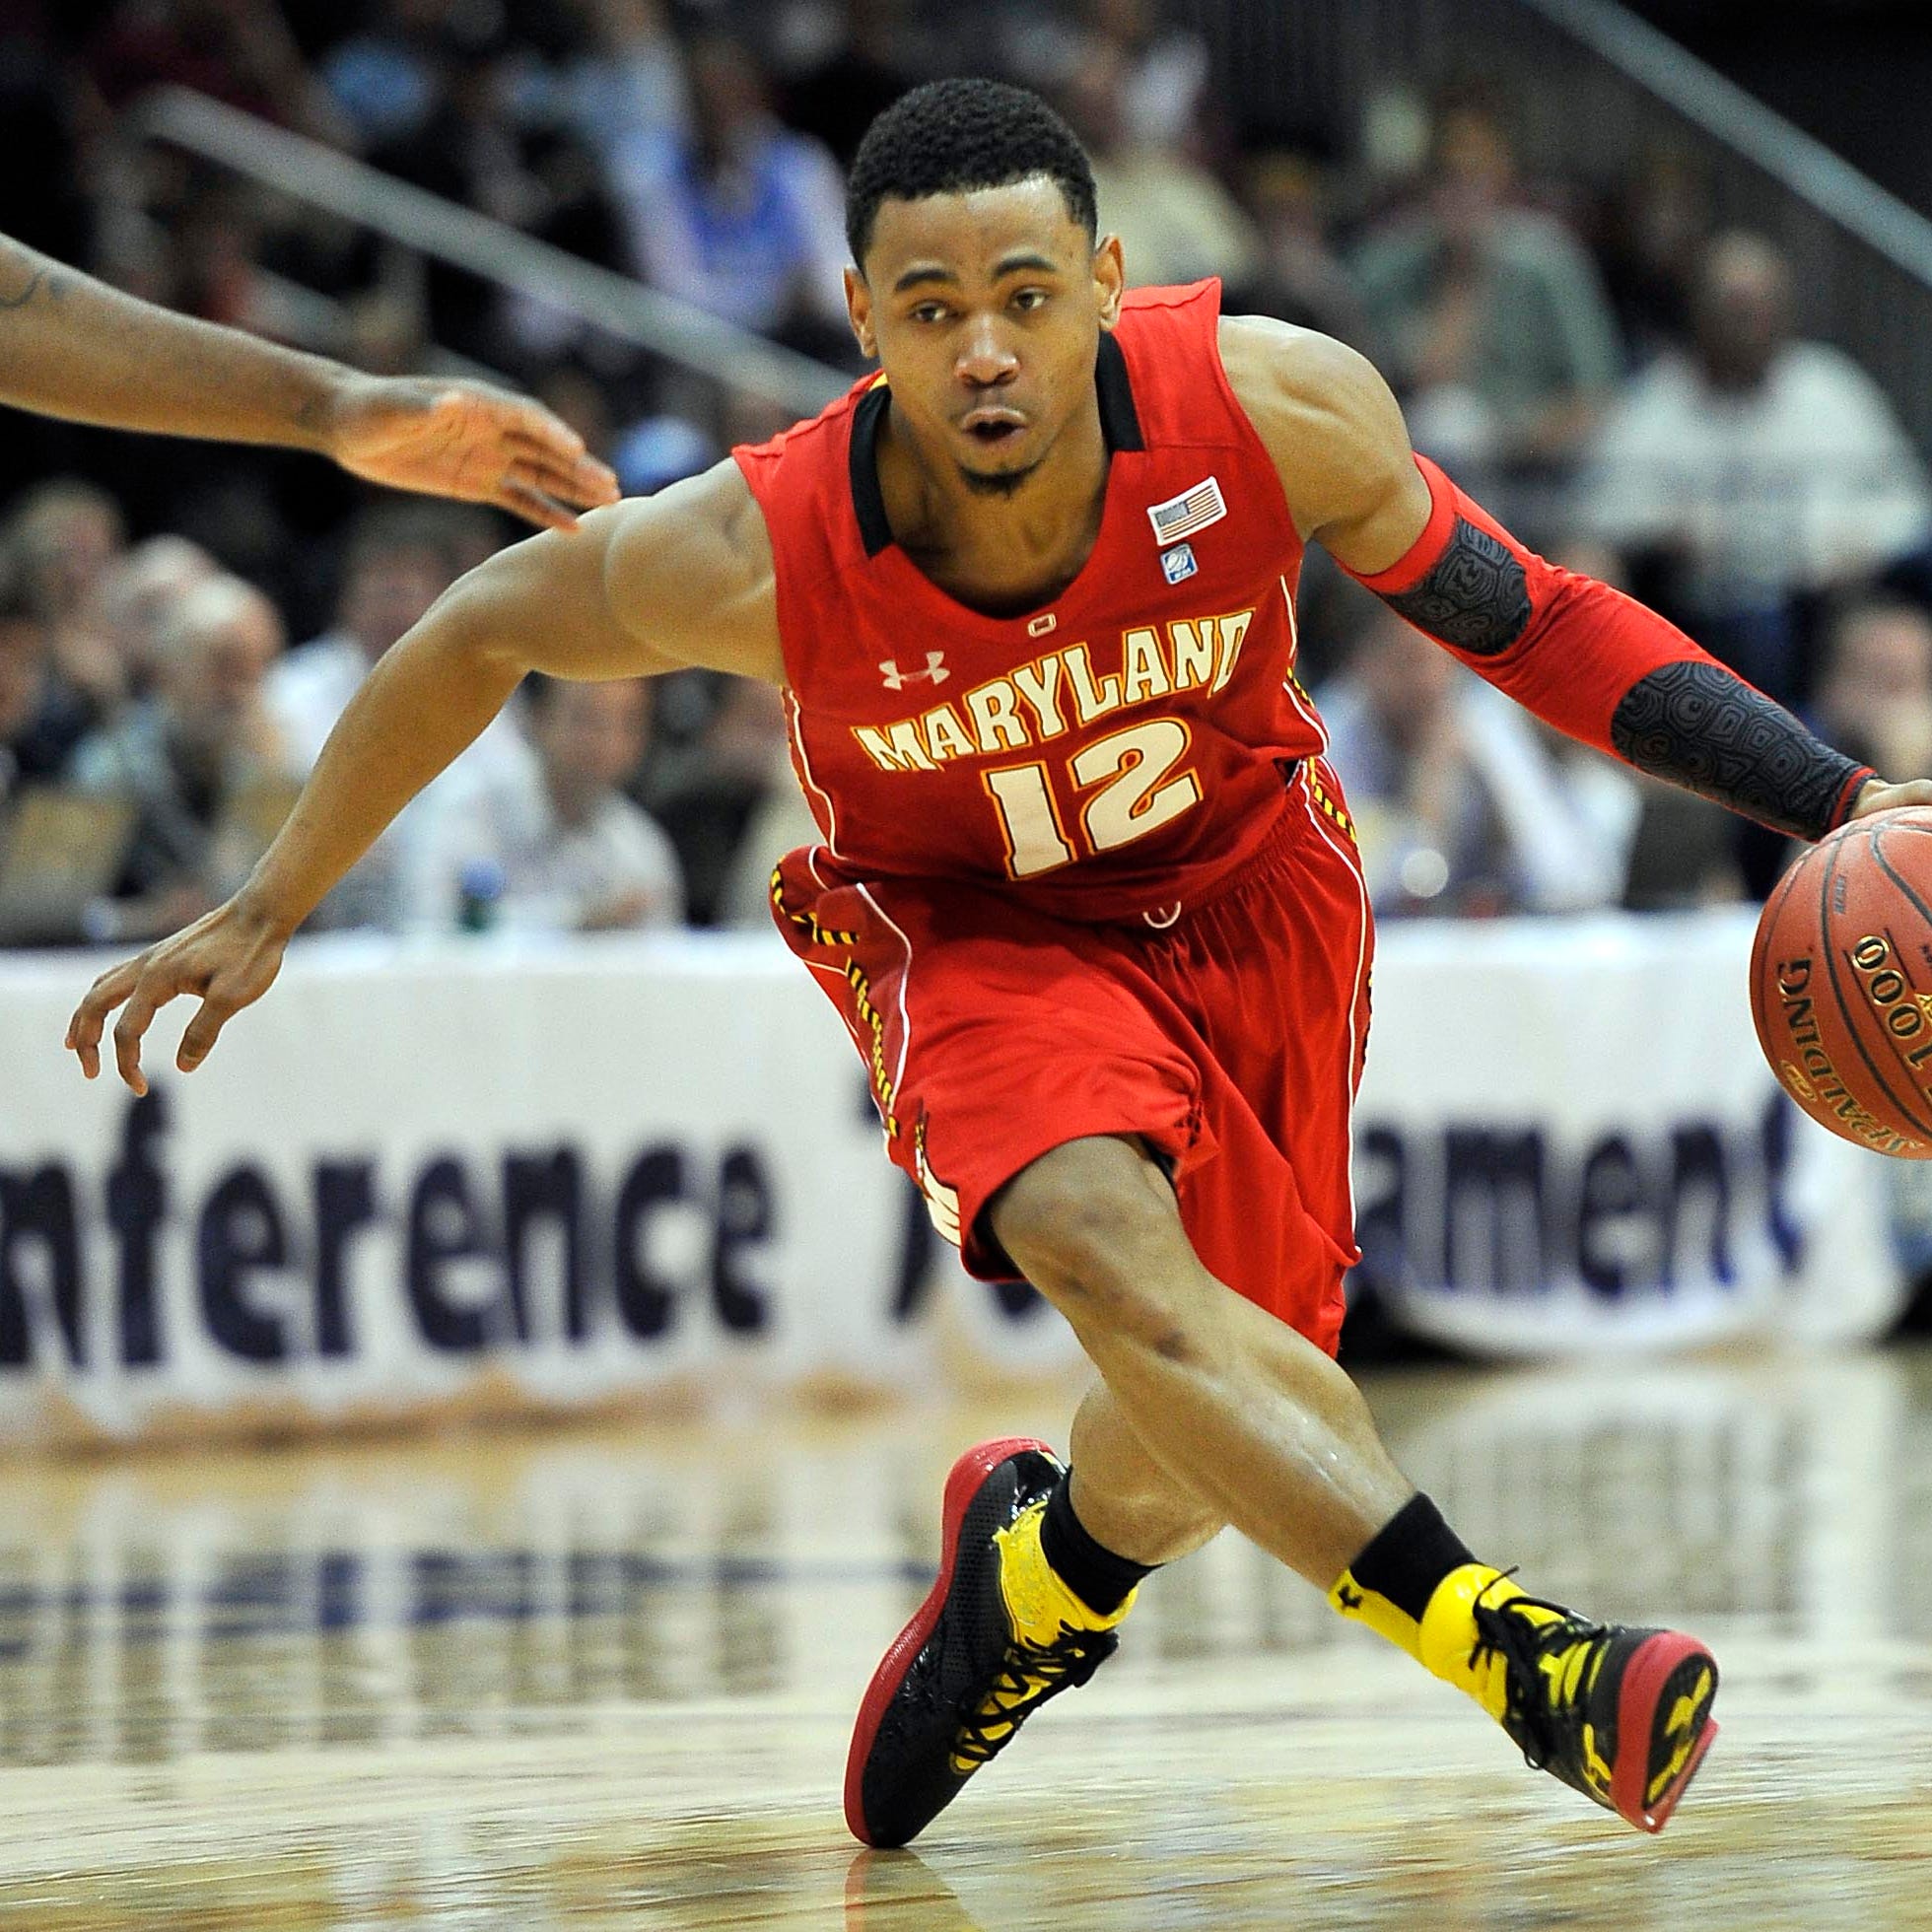 Former Maryland guard Terrell Stoglin threw quite the on-court tantrum during a game in Venezuela.